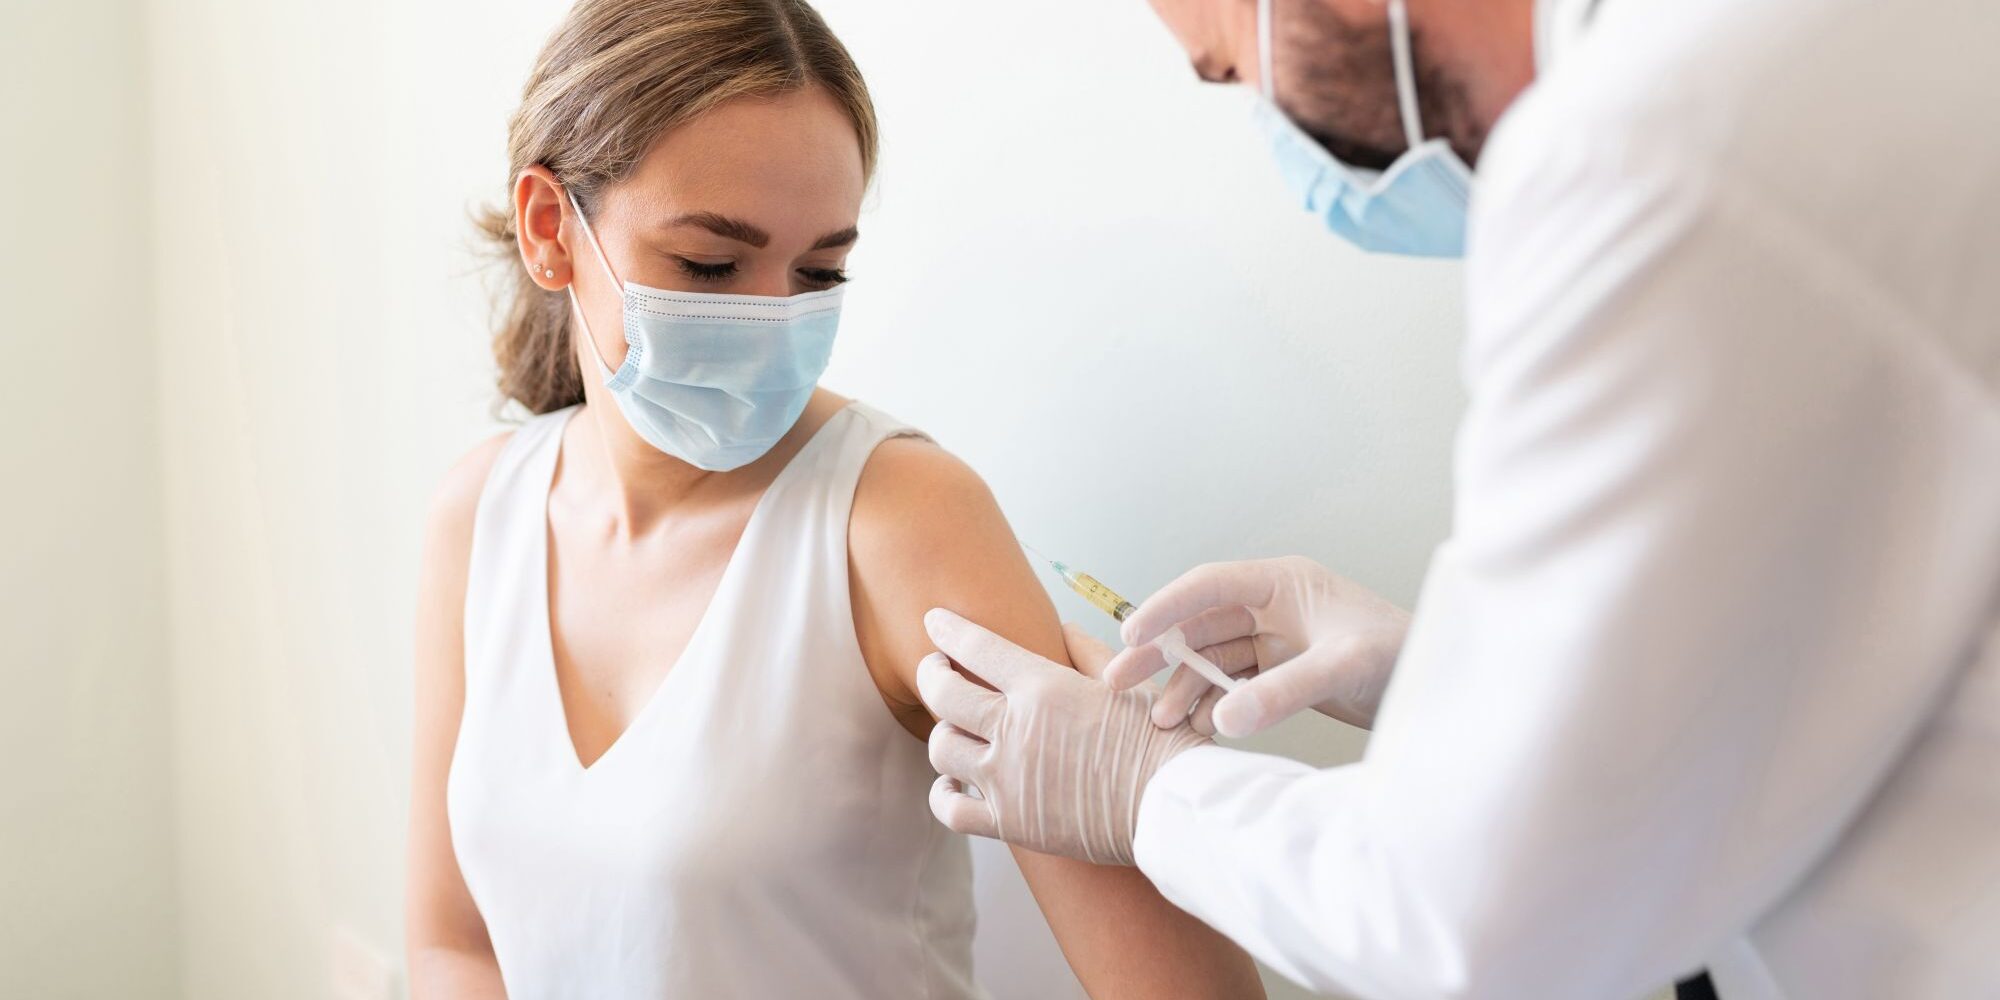 Closeup of a nervous woman and her doctor wearing face masks and getting a vaccine shot in a doctor's office